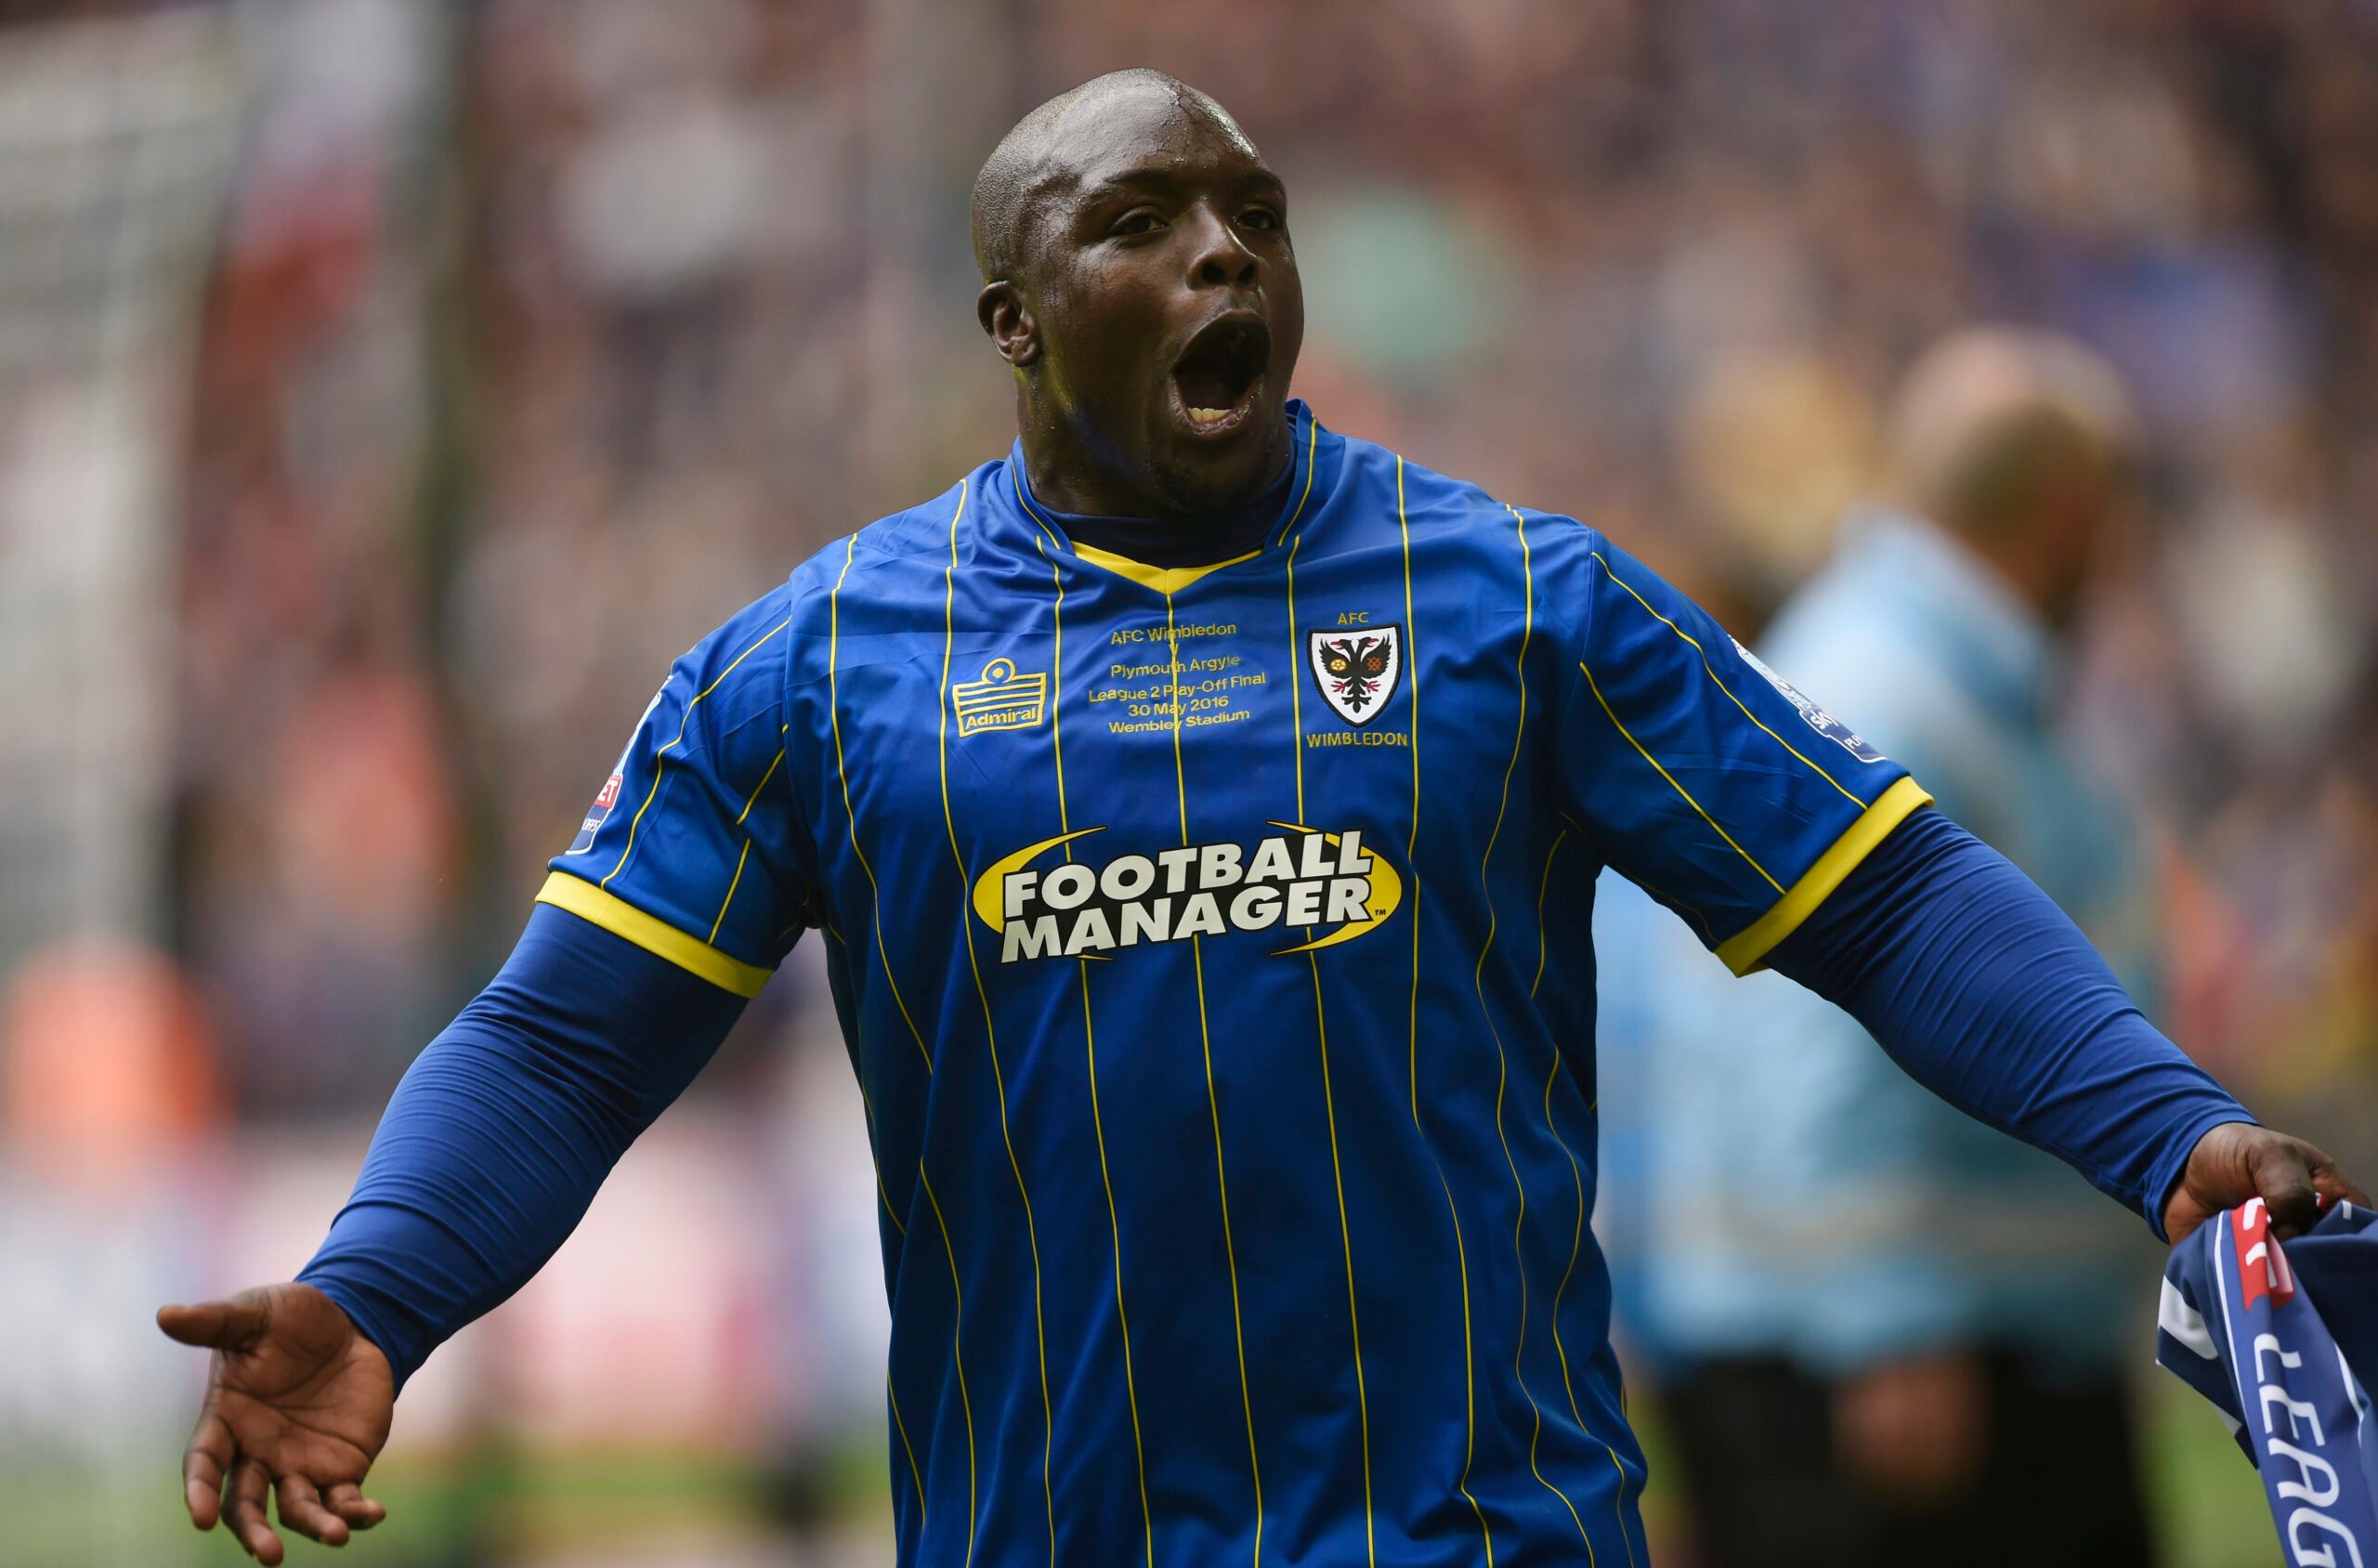 Britain Soccer Football - AFC Wimbledon v Plymouth Argyle - Sky Bet Football League Two Play-Off Final - Wembley Stadium - 30/5/16 
AFC Wimbledon's Adebayo Akinfenwa celebrates at the end of the match 
Mandatory Credit: Action Images / Tony O'Brien 
Livepic 
EDITORIAL USE ONLY. No use with unauthorized audio, video, data, fixture lists, club/league logos or 